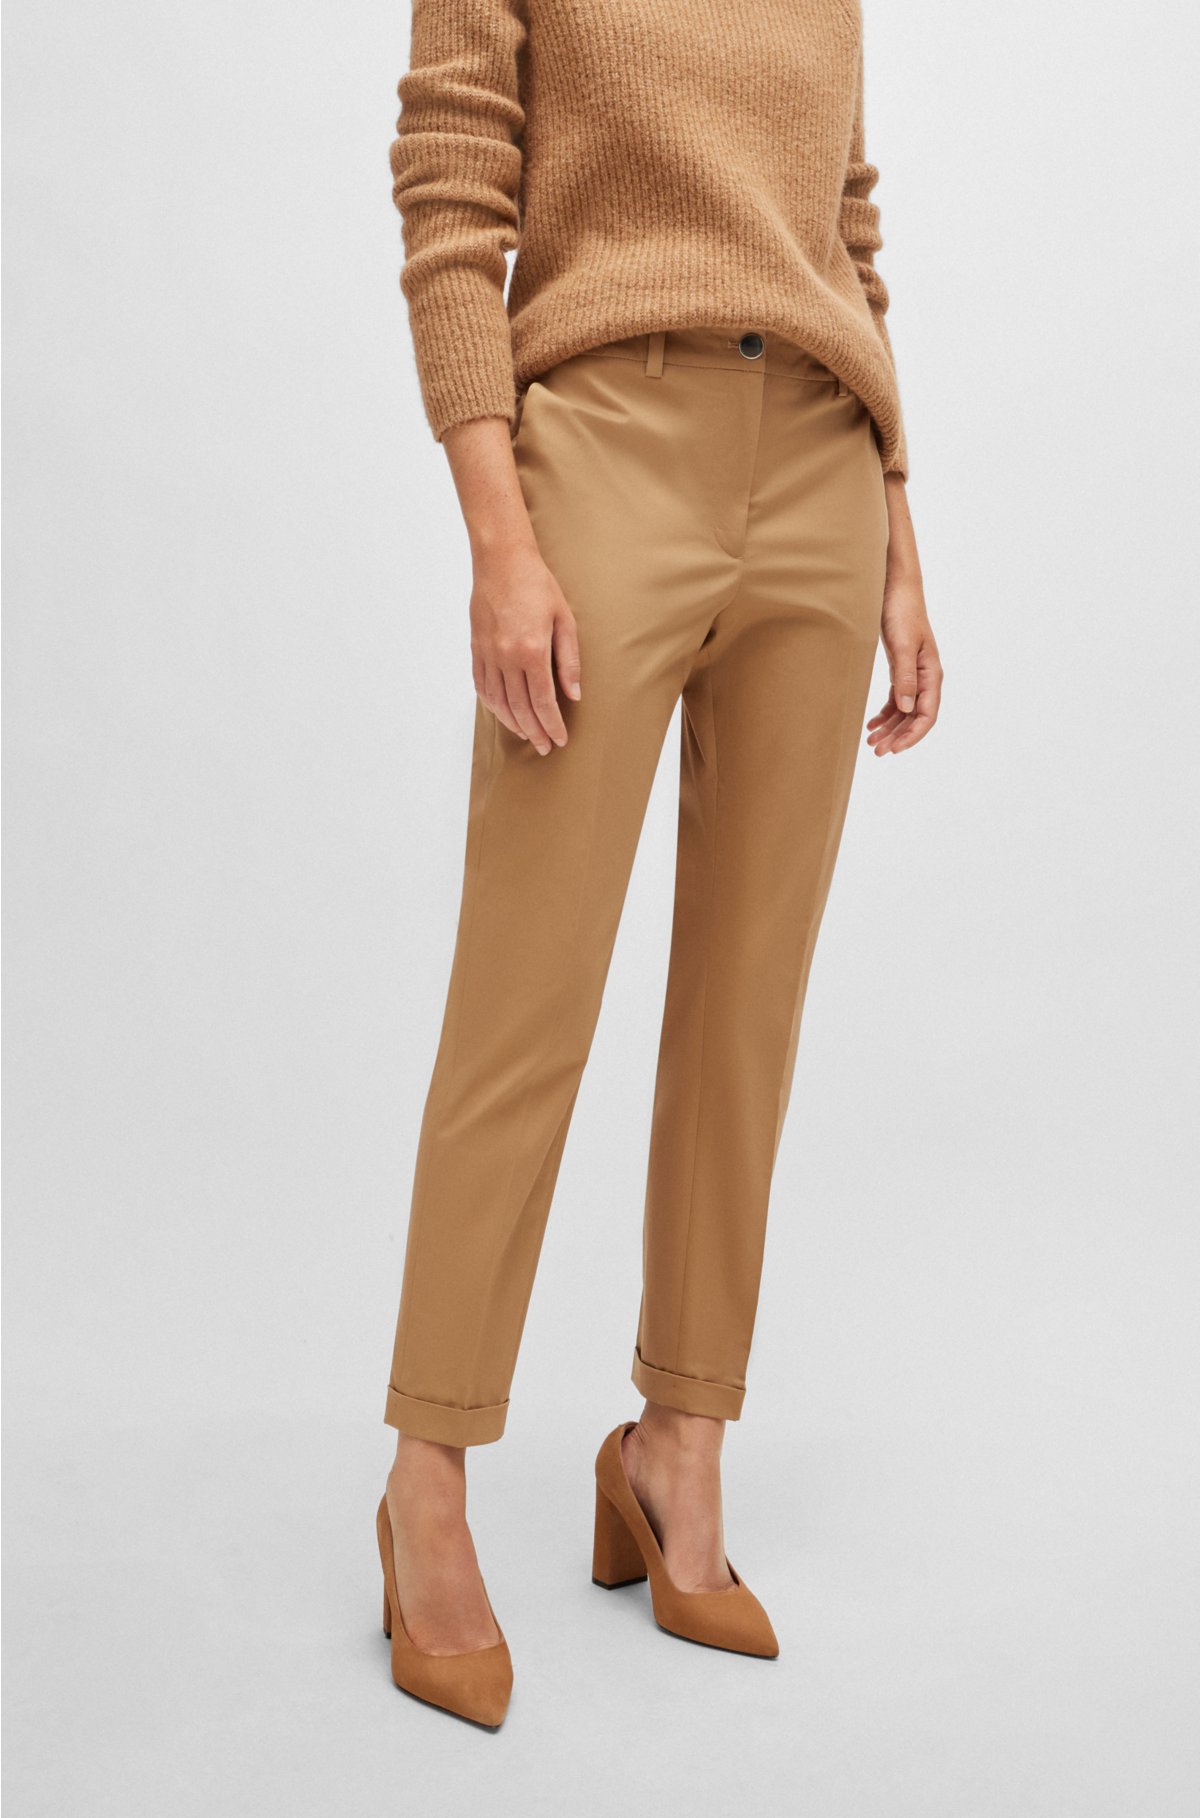 Brushed Twill Pant - Moss